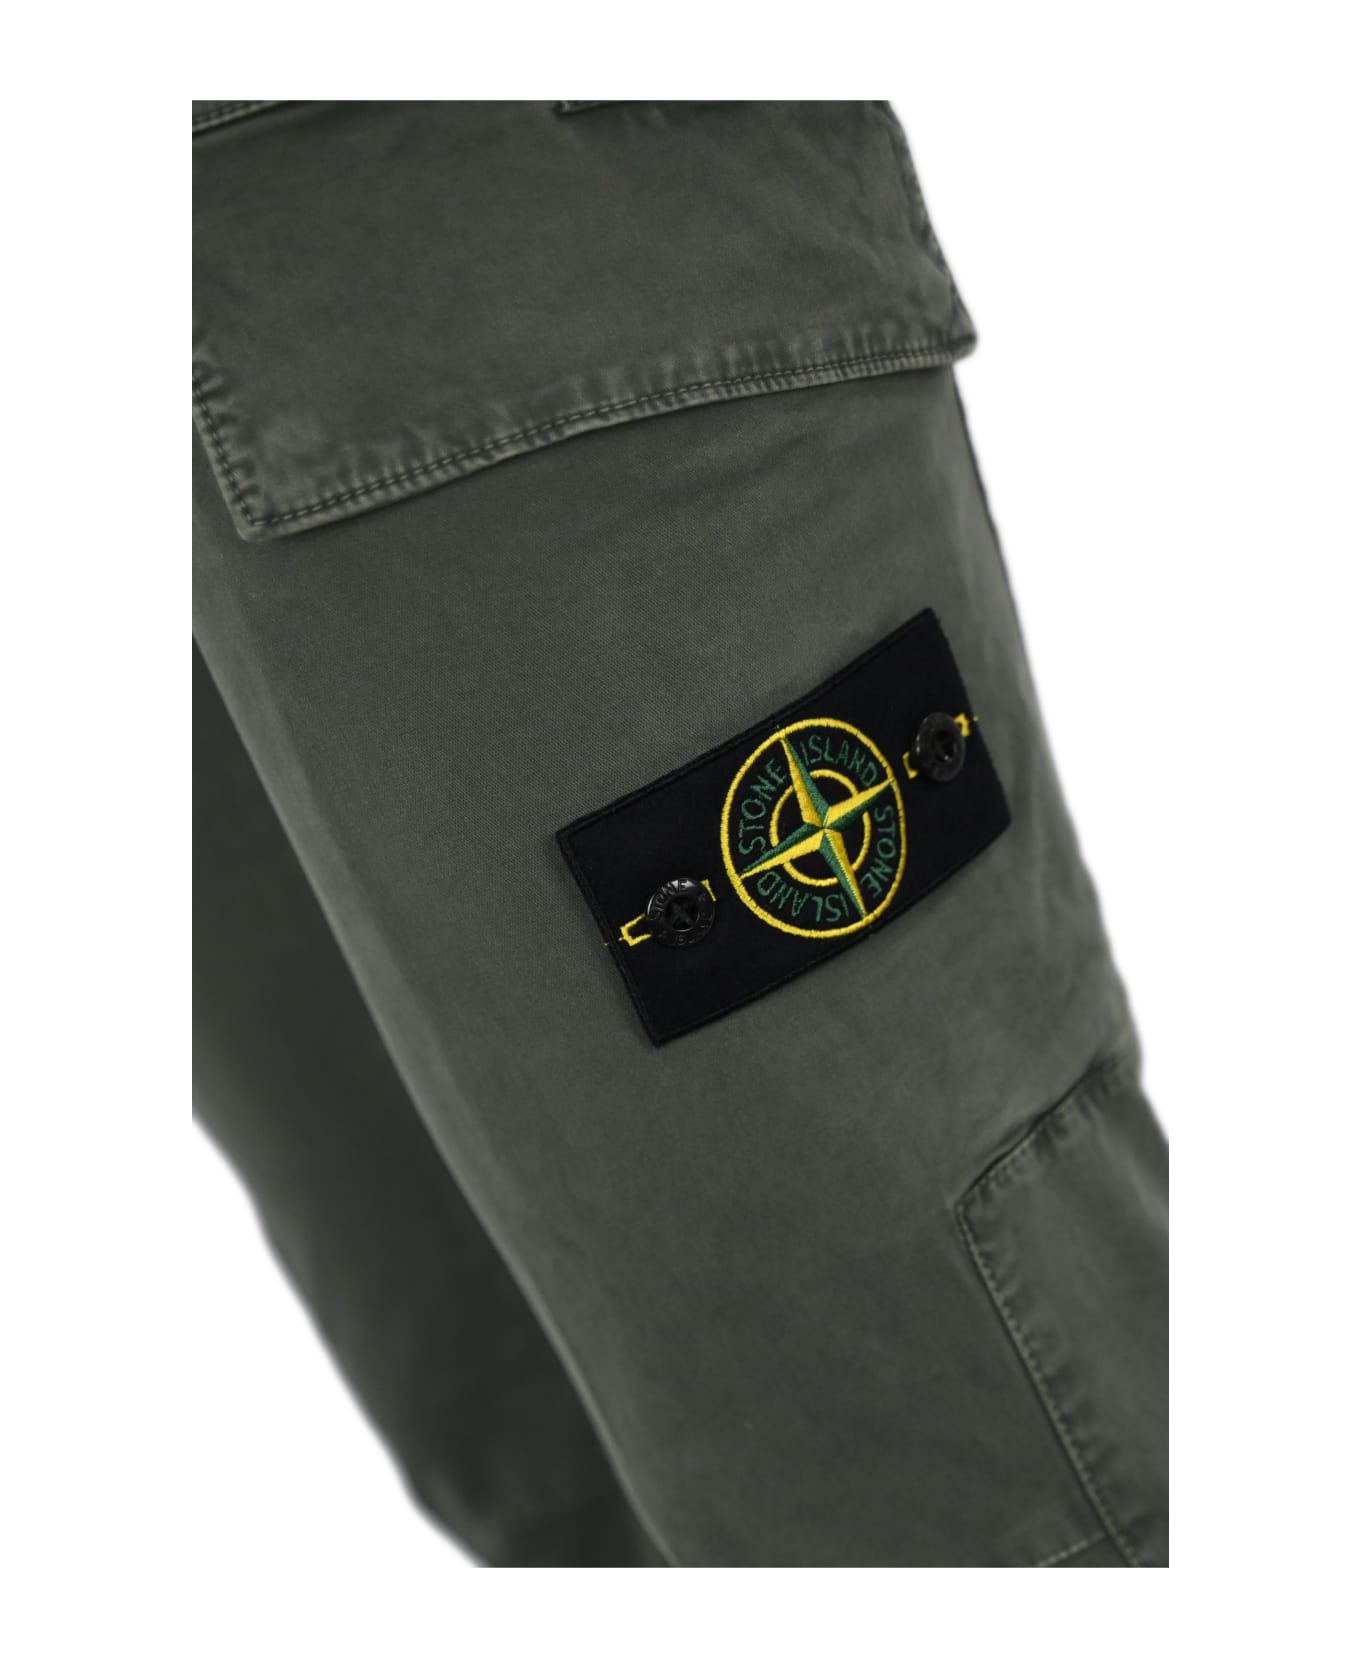 Stone Island Cargo Trousers 30604 Old Treatment - Musk ボトムス